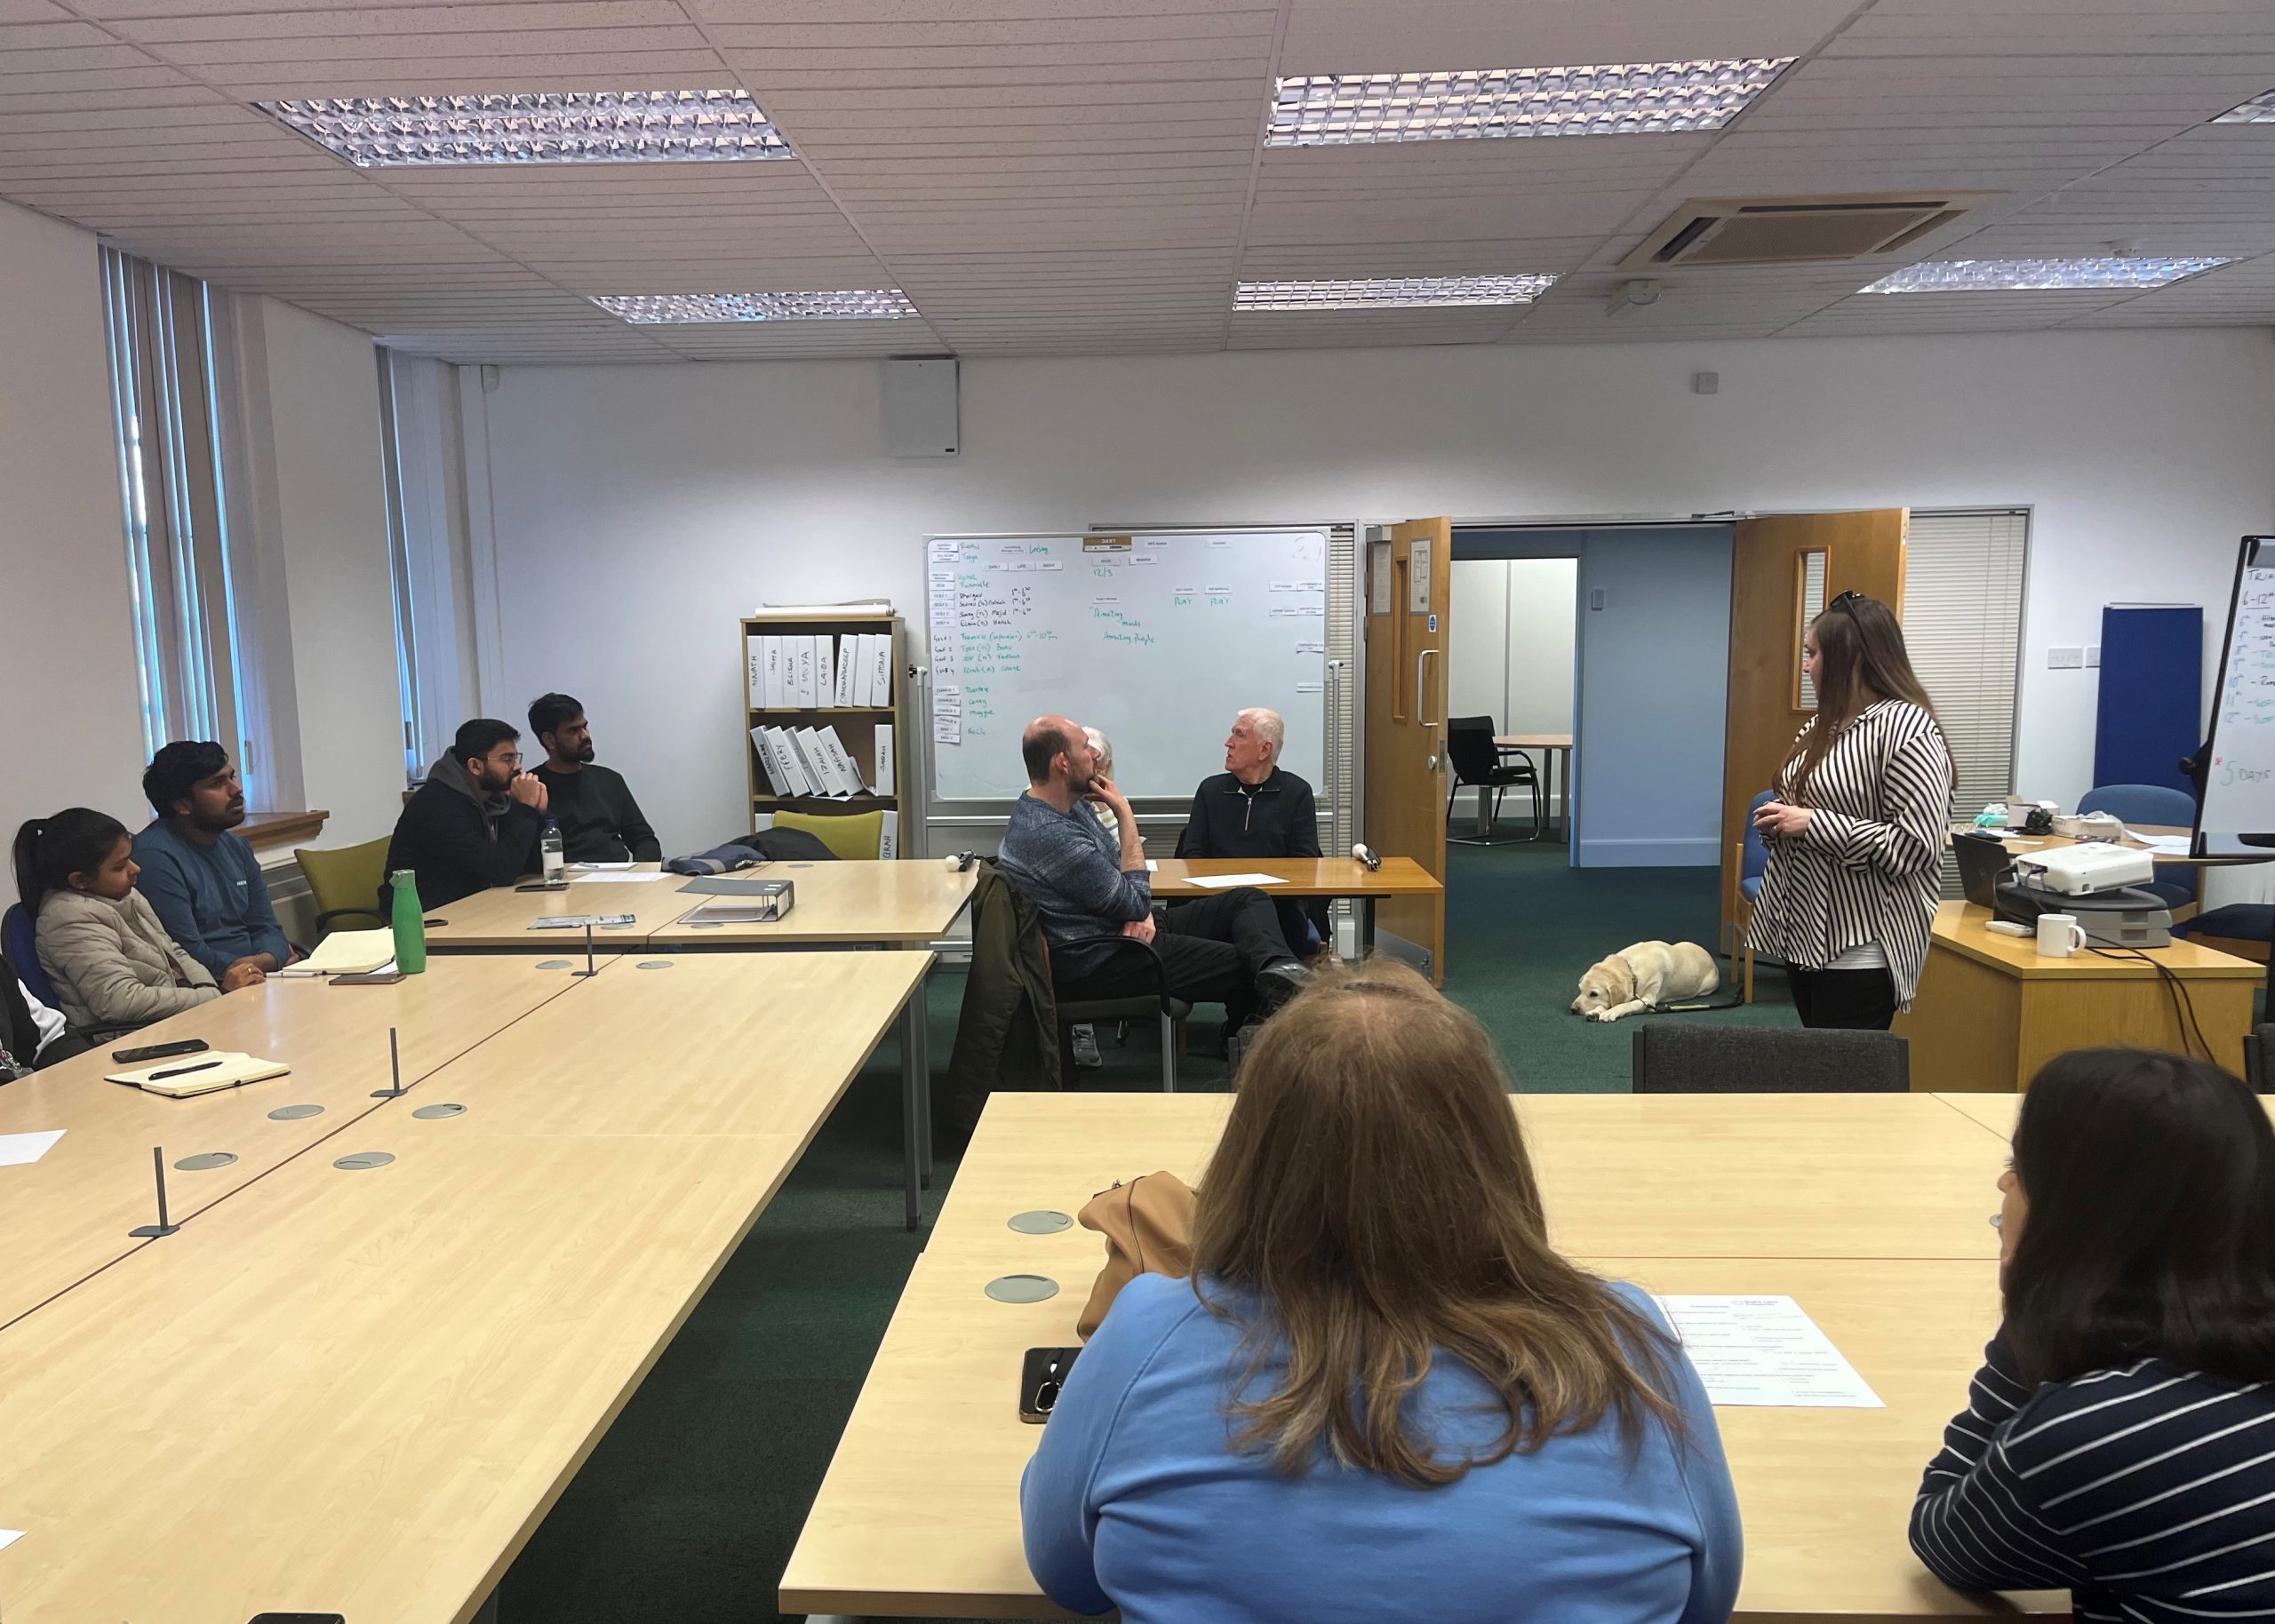 Samantha Leftwich, Engagement Manager for the East, is stood in the centre of a room giving a talk to Ethos Farm employees.